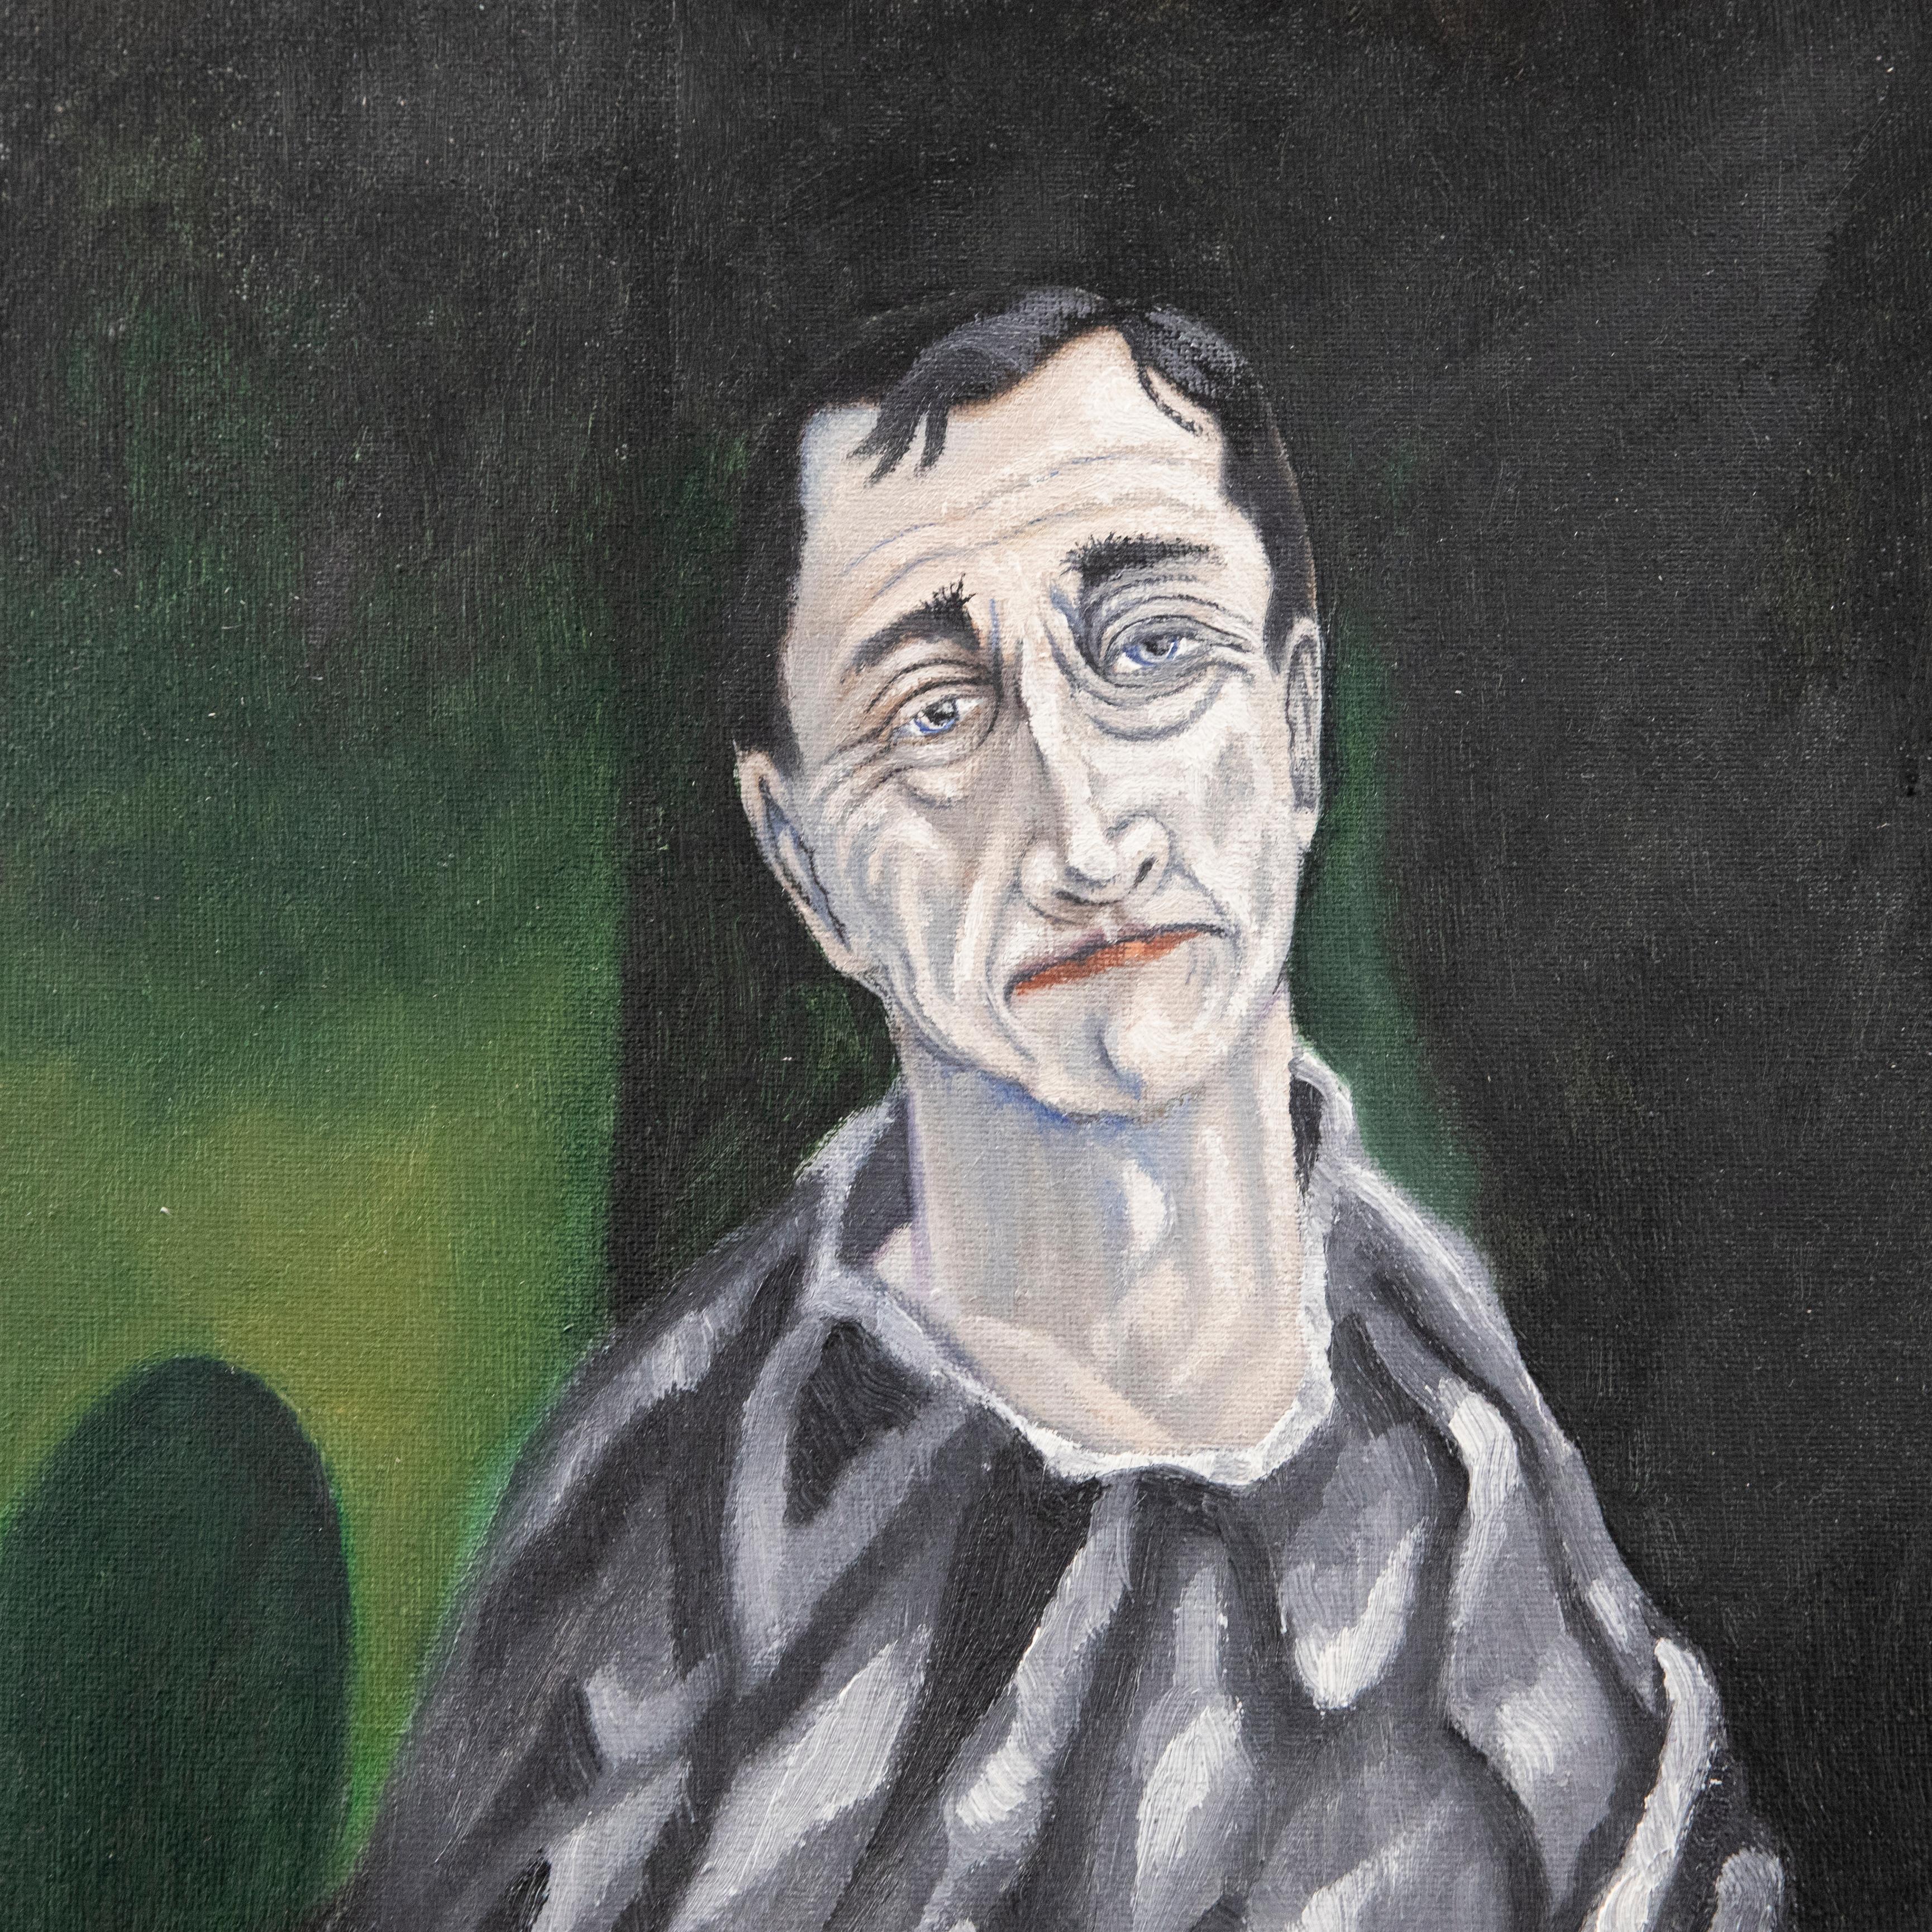 A striking self portrait of the artist sitting on the floor of a darkened room, A self reflective, emotional piece, the artist explores darker subjects in this haunting portrait. Signed and dated to the lower right. On canvas. 
